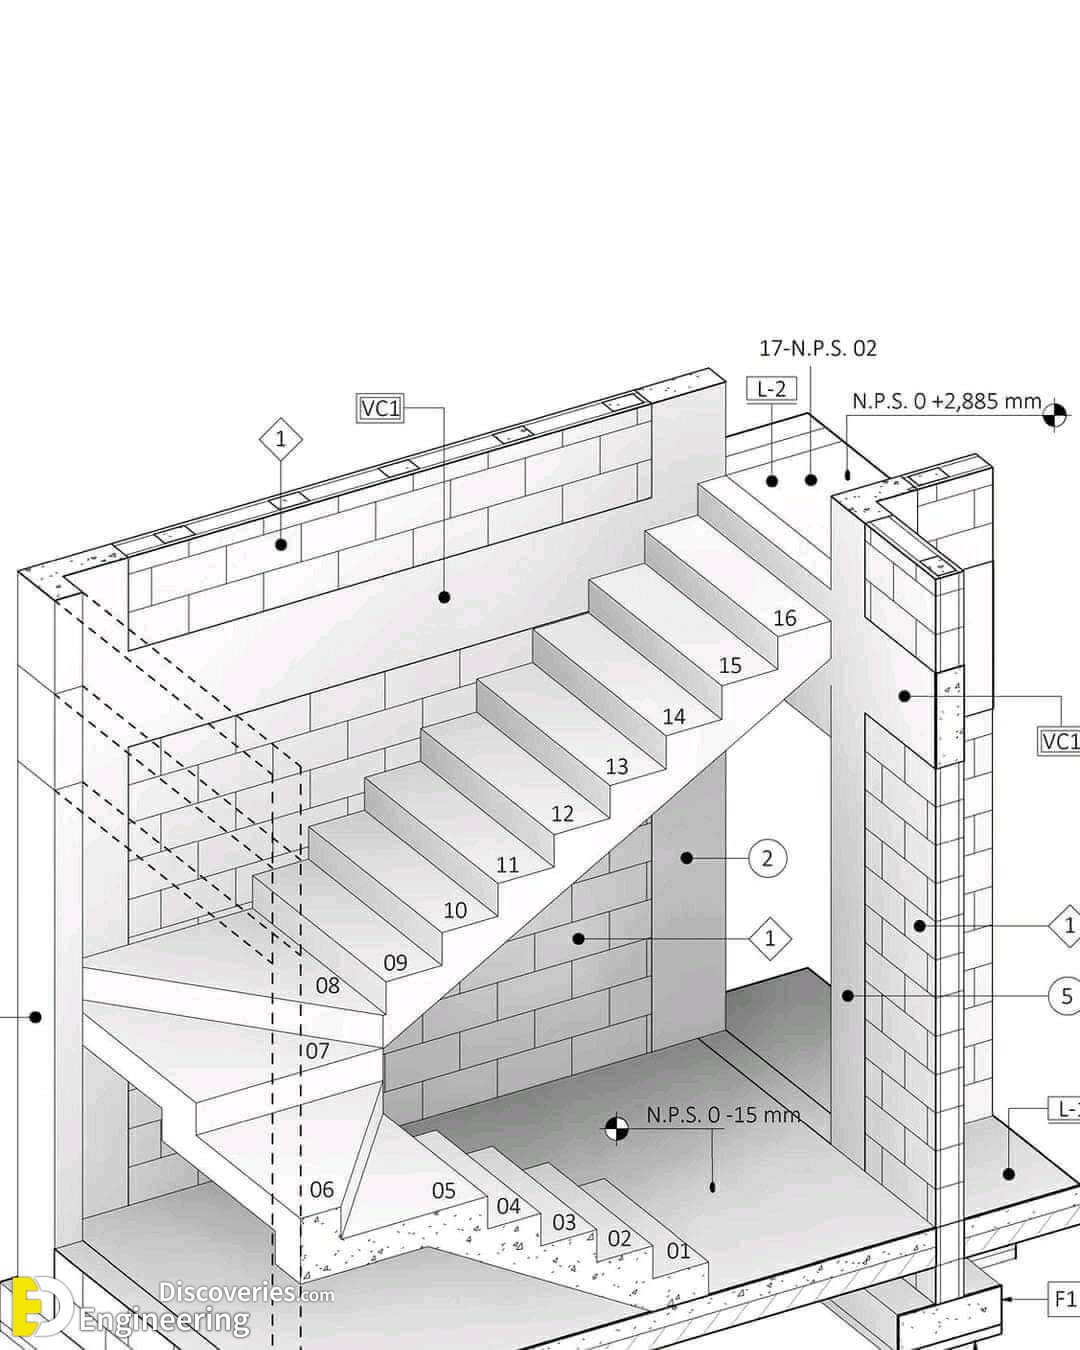 Design for a staircase: section, plan and elevation | RIBA pix